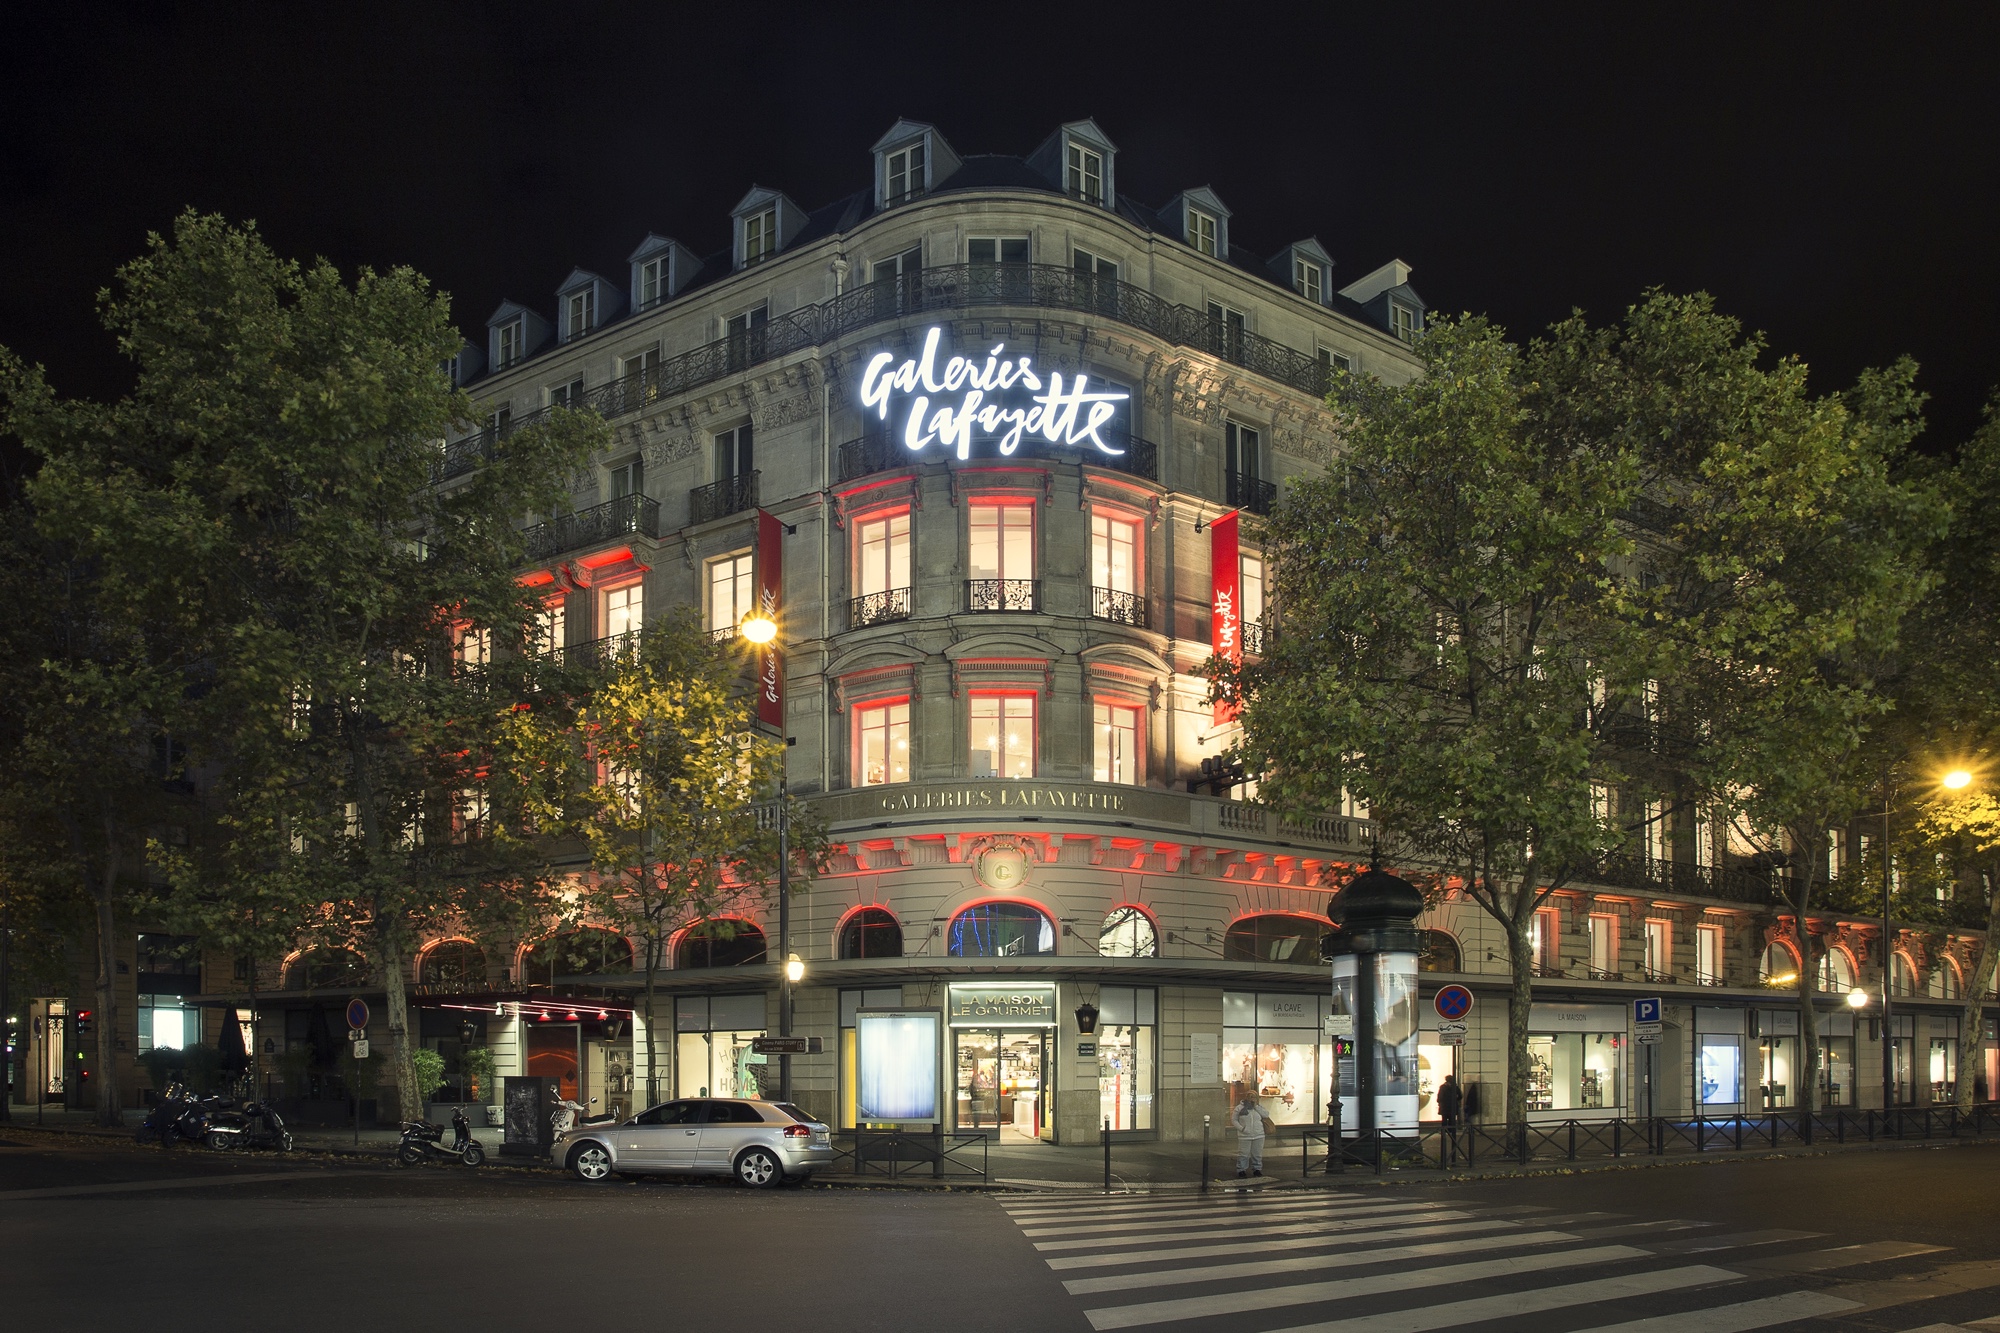 Galeries Lafayette's Go For Good project educates on sustainable